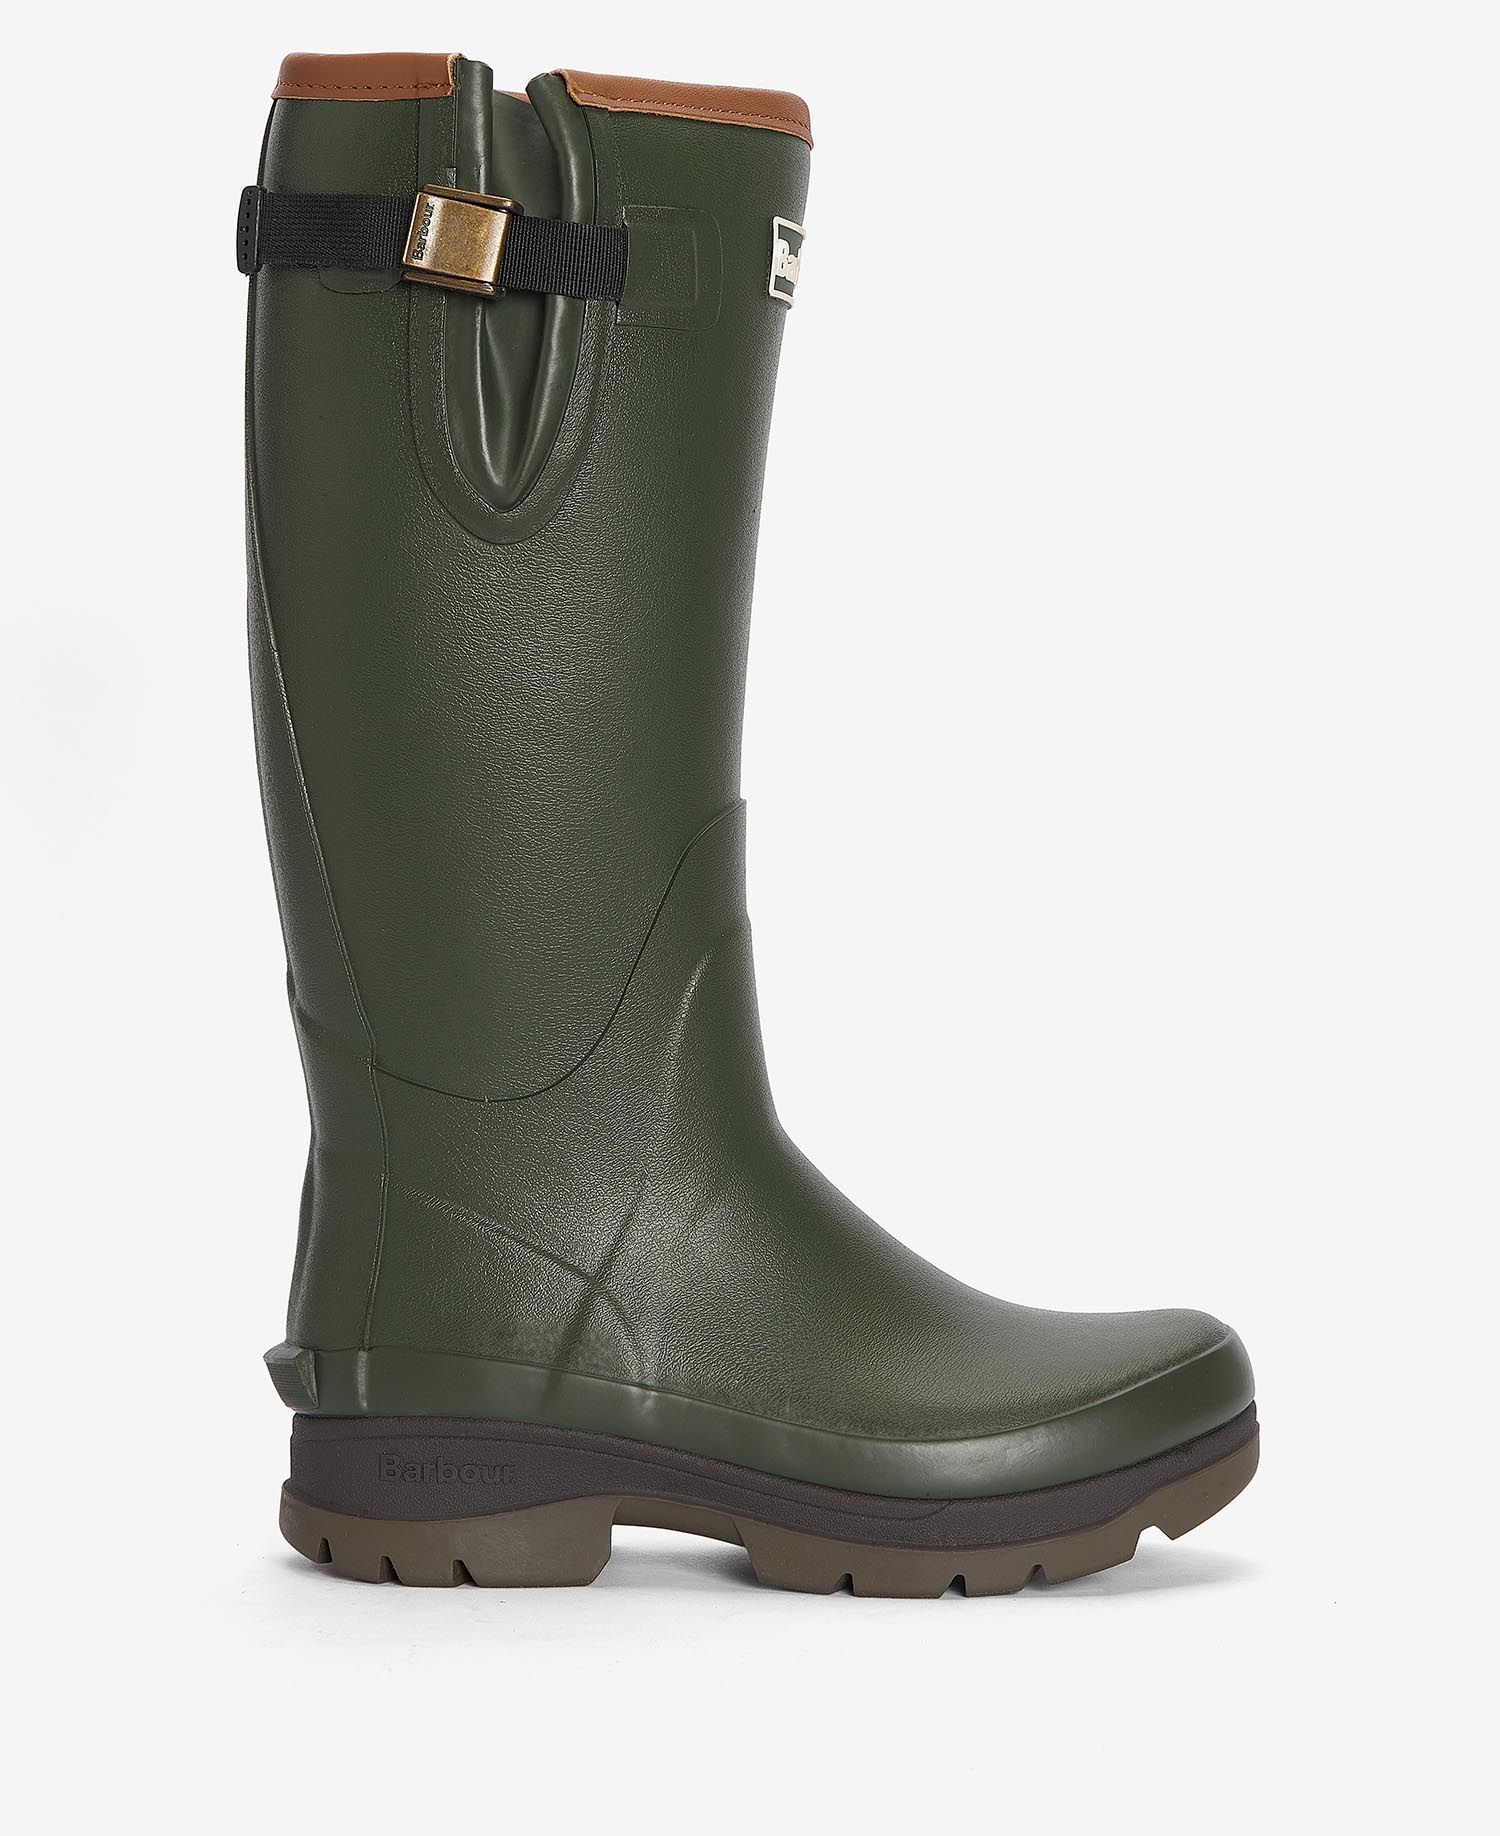 Barbour Womens Tempest Wellingtons in Olive | Barbour